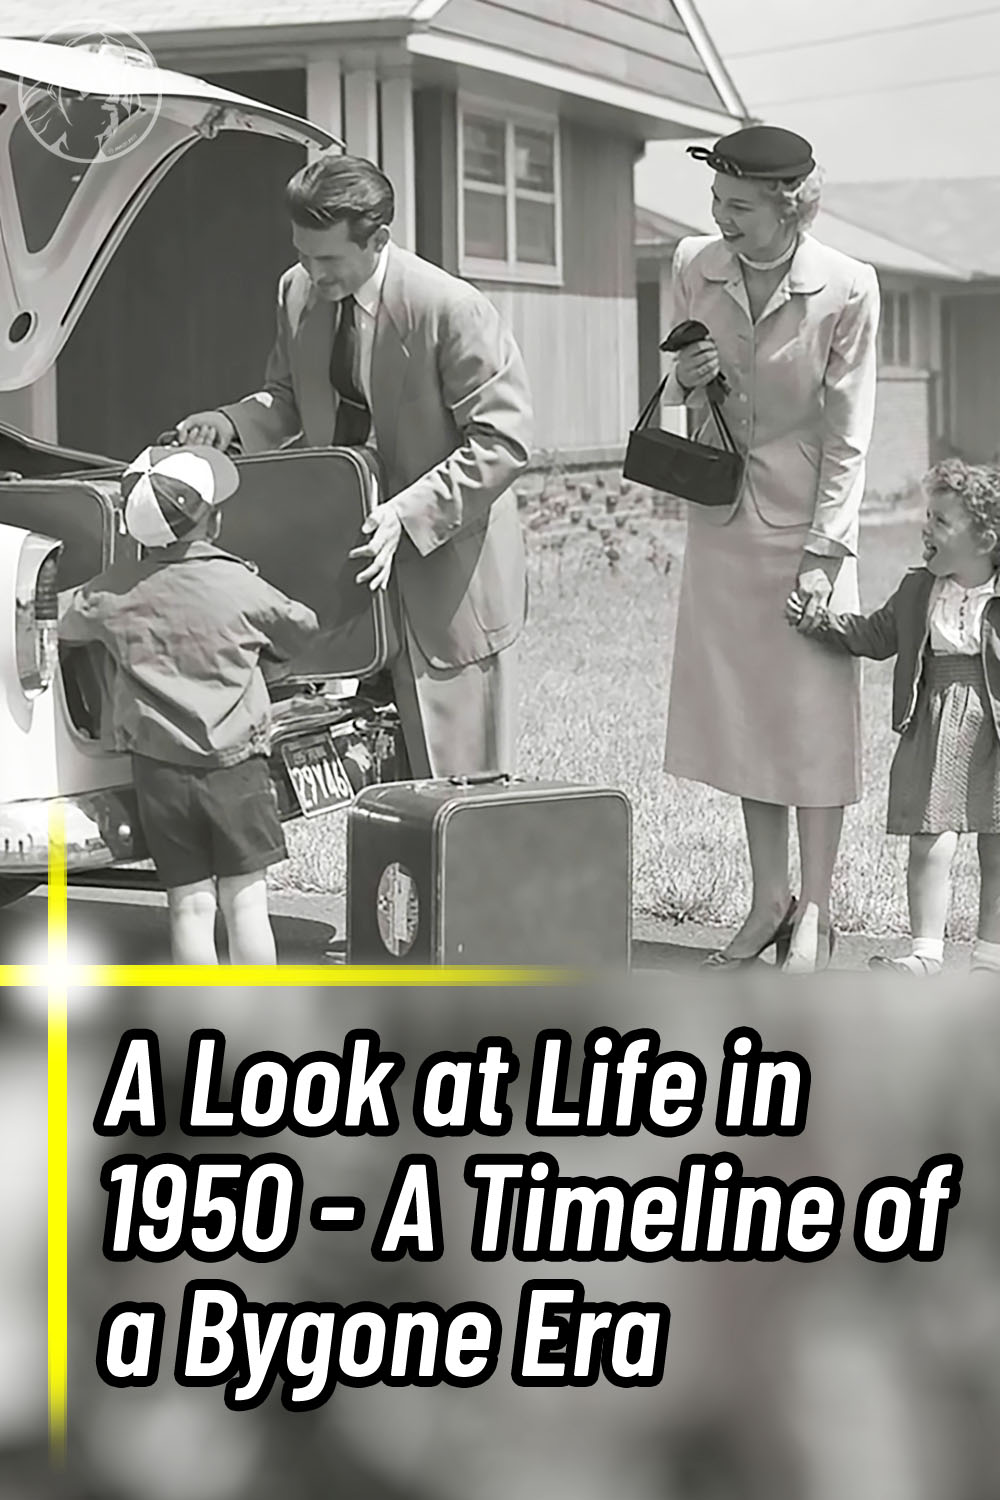 A Look at Life in 1950 - A Timeline of a Bygone Era